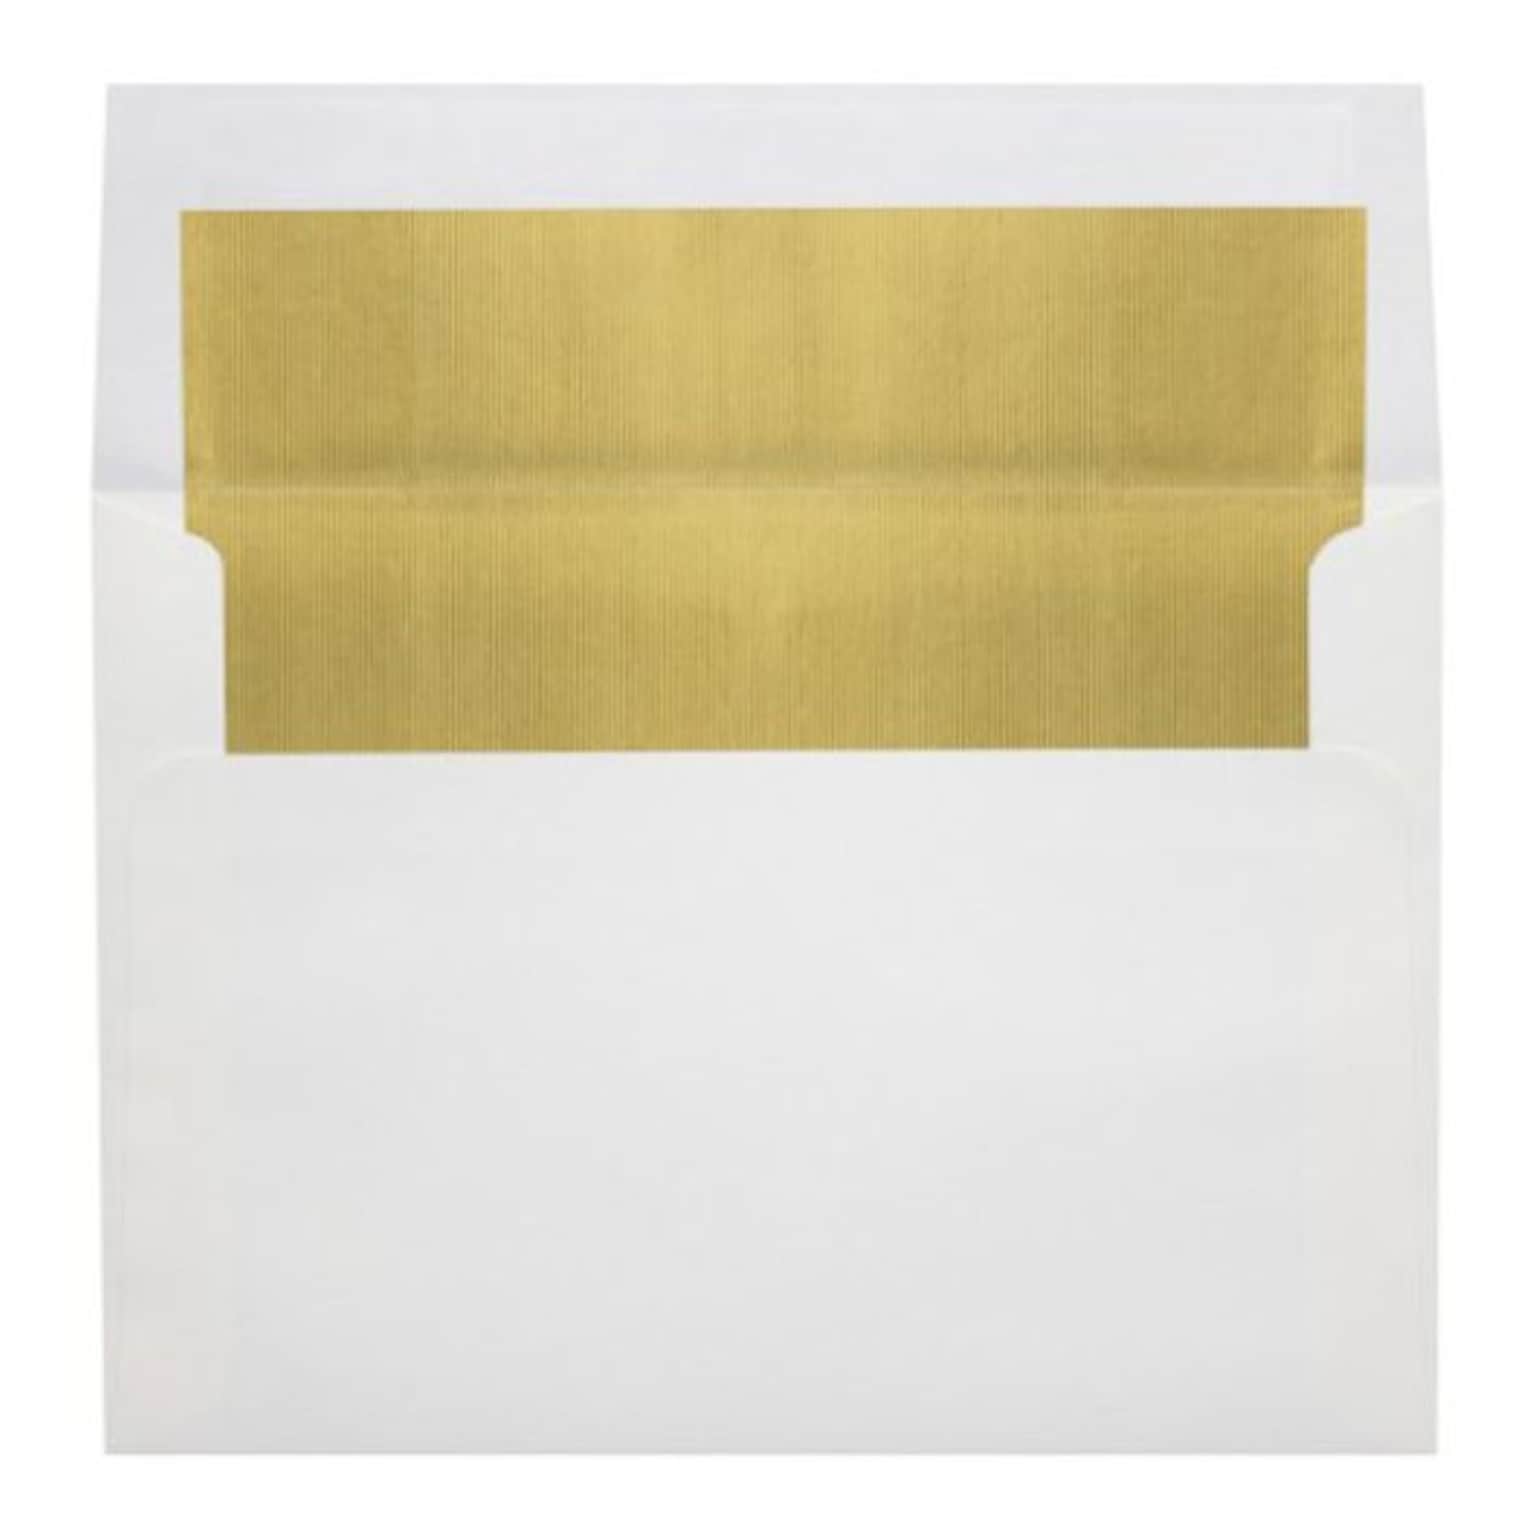 LUX A8 Foil Lined Invitation Envelopes (5 1/2 x 8 1/8) 250/Box, White w/Gold LUX Lining (FLWH4885-04-250)